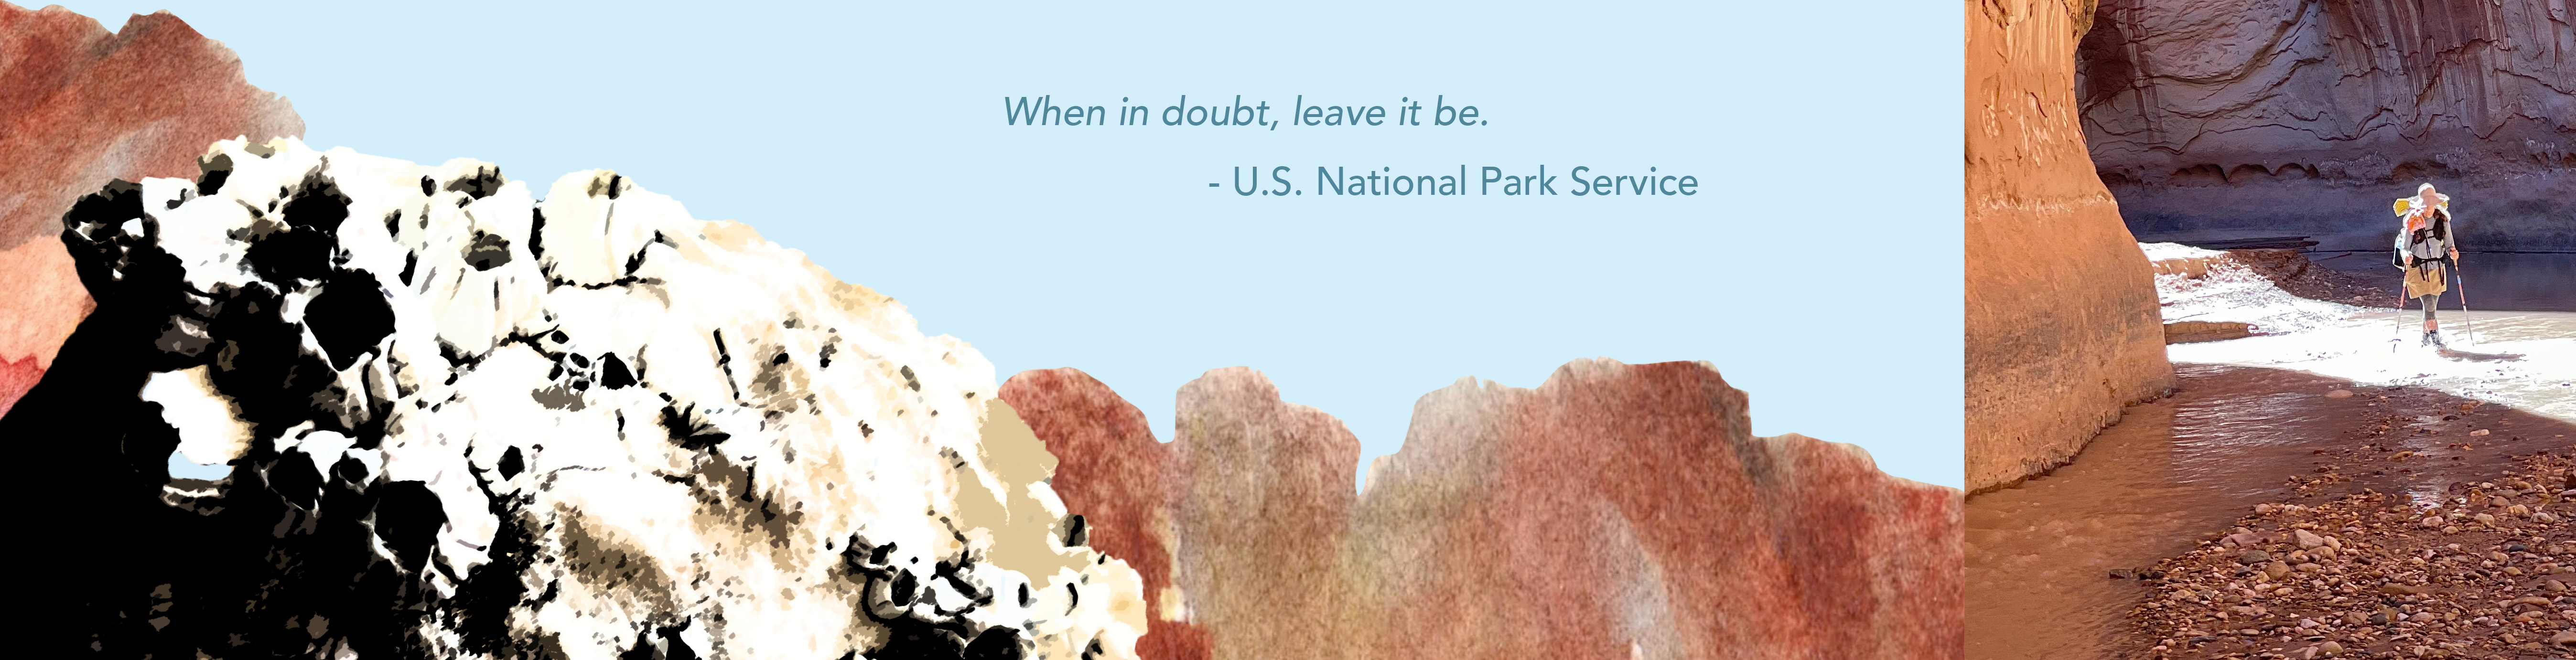 When in doubt, leave it be - U.S. National Park Service